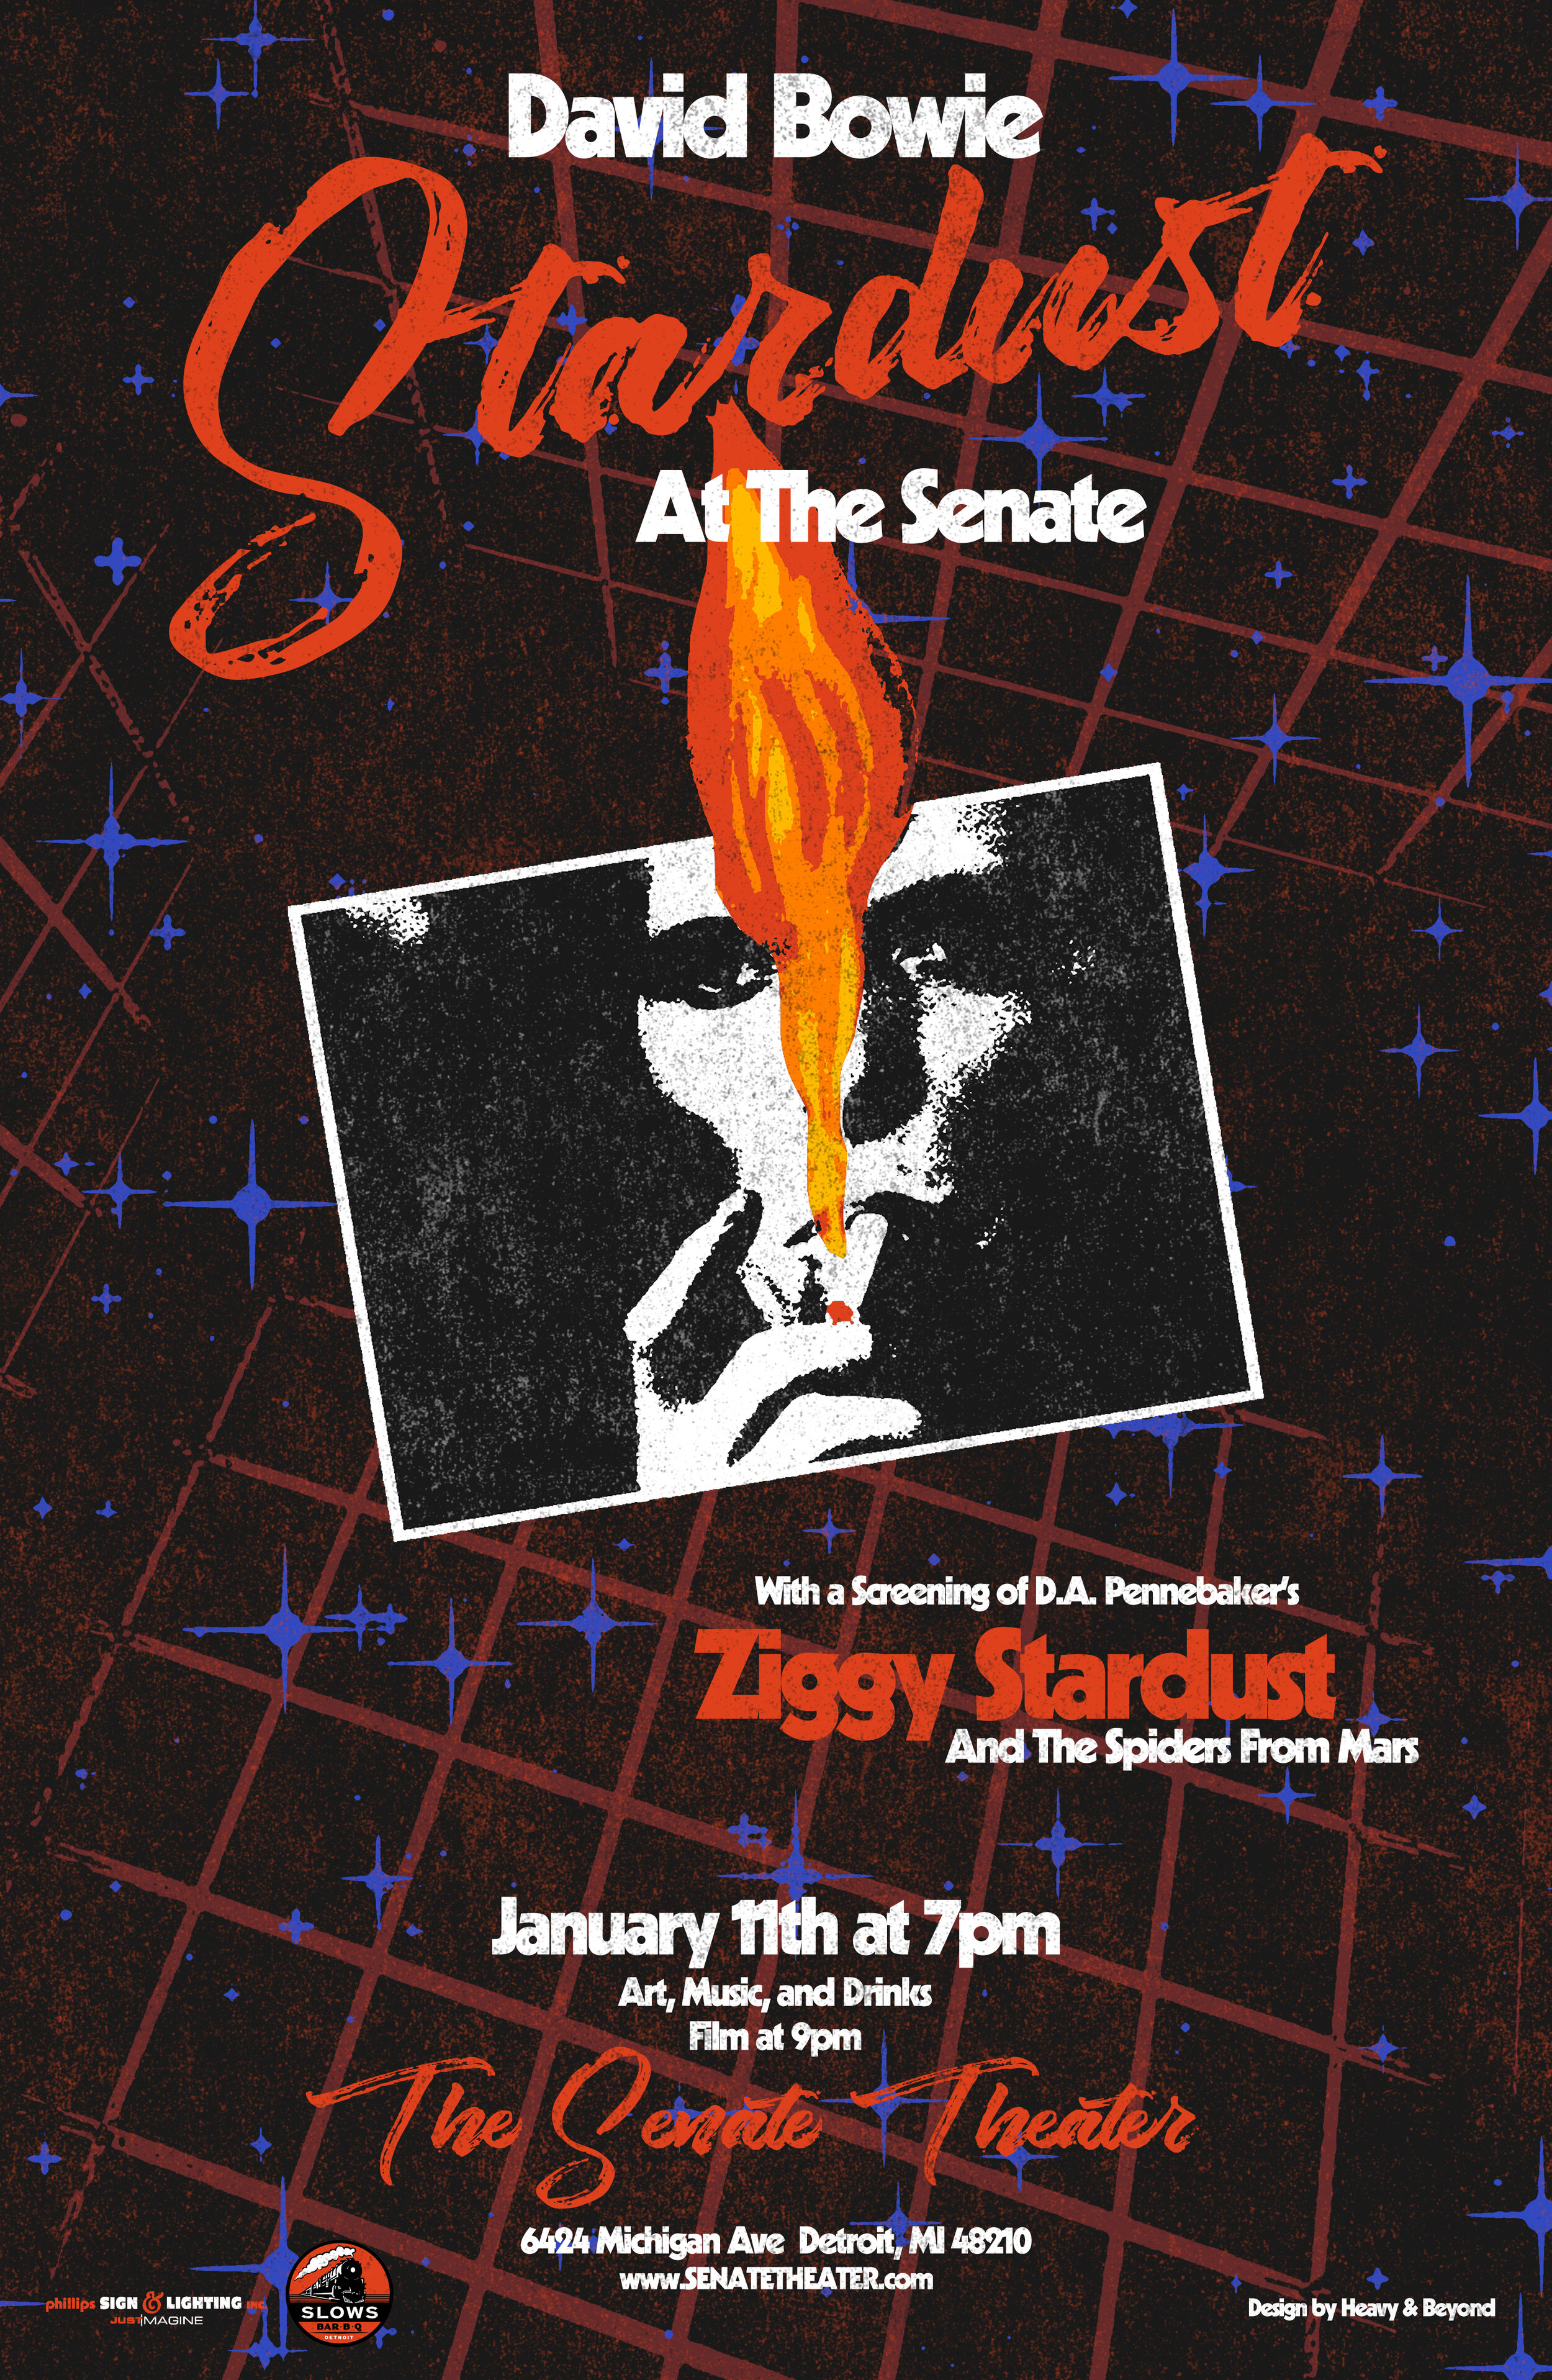 Stardust at the Senate 2020 Poster by Heavy and Beyond